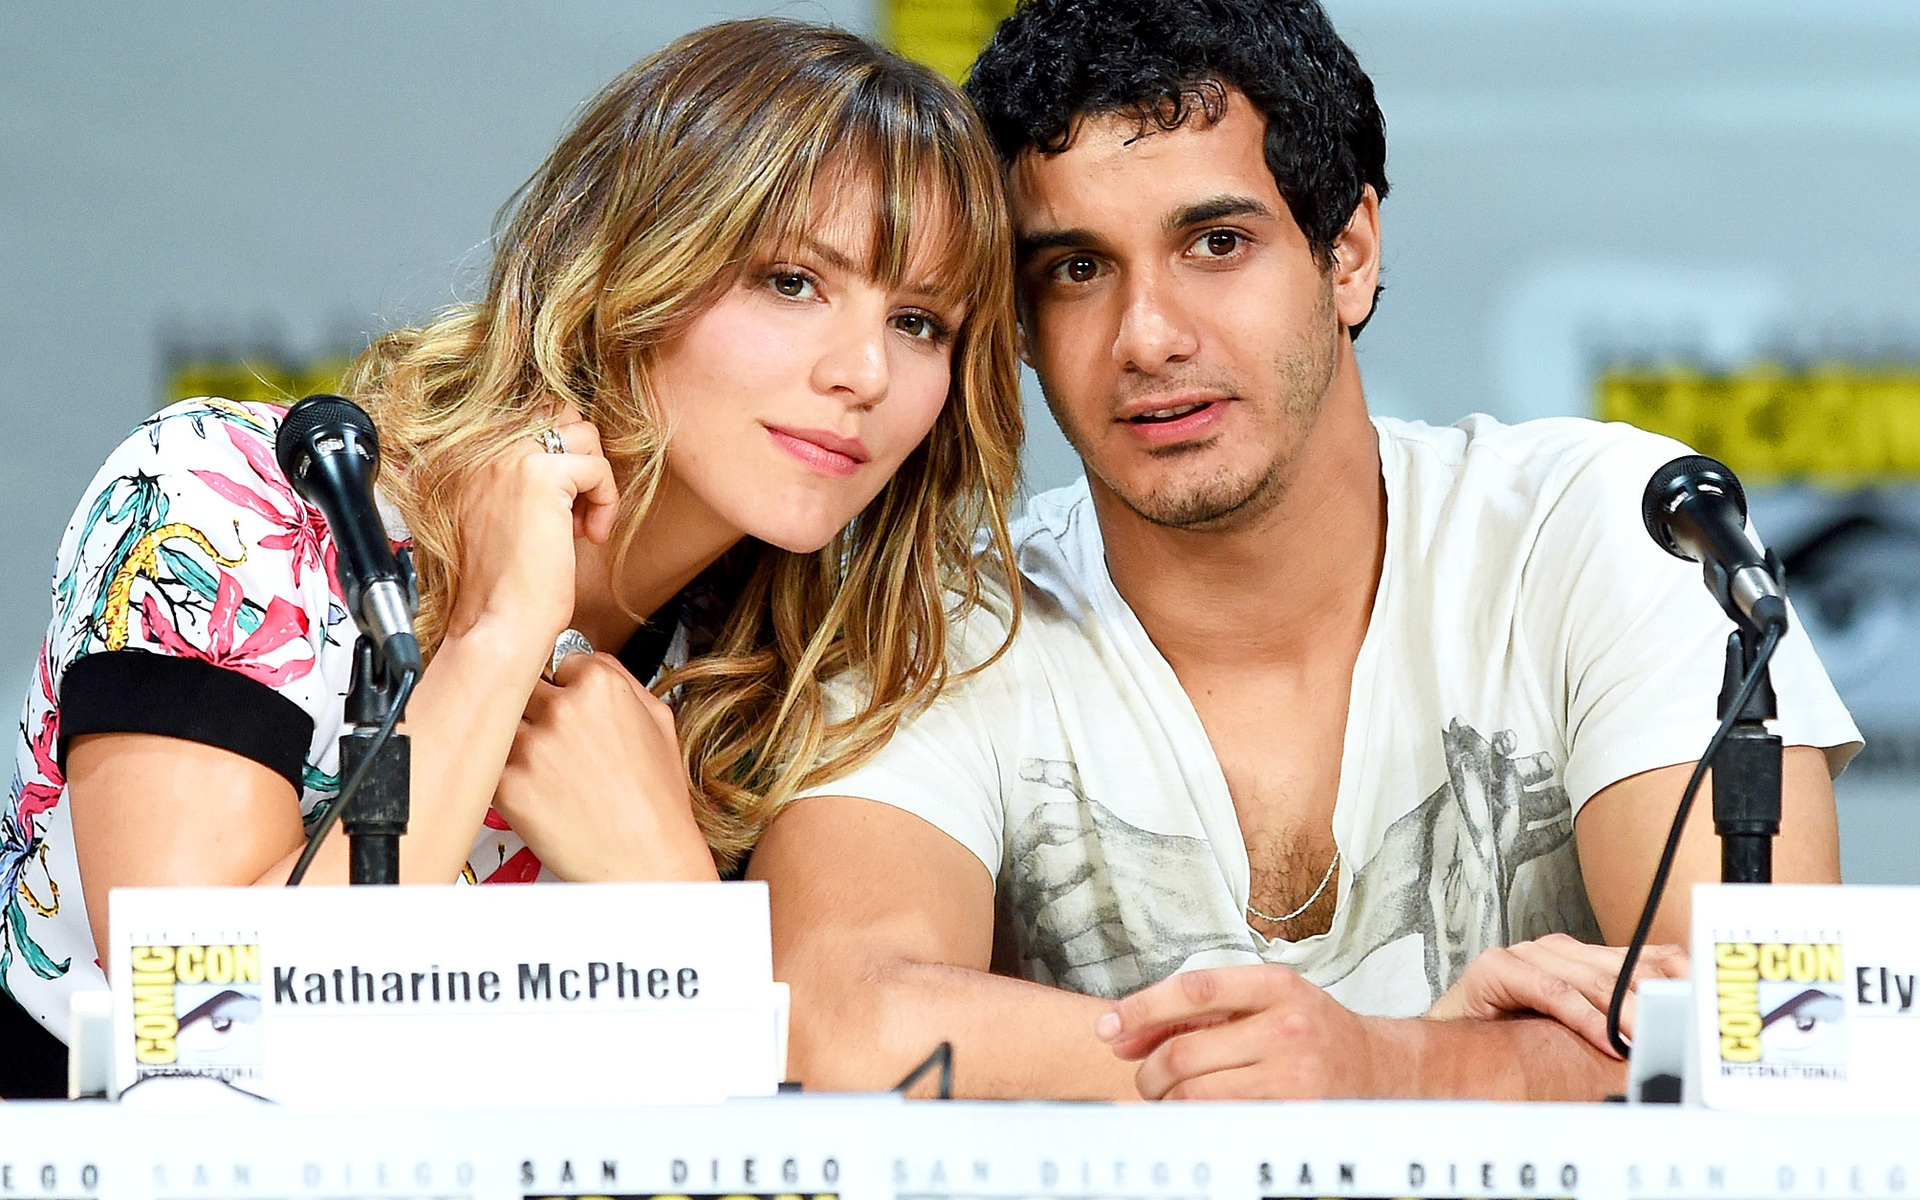 Katharine McPhee and Elyes Gabel for 1920 x 1200 widescreen resolution